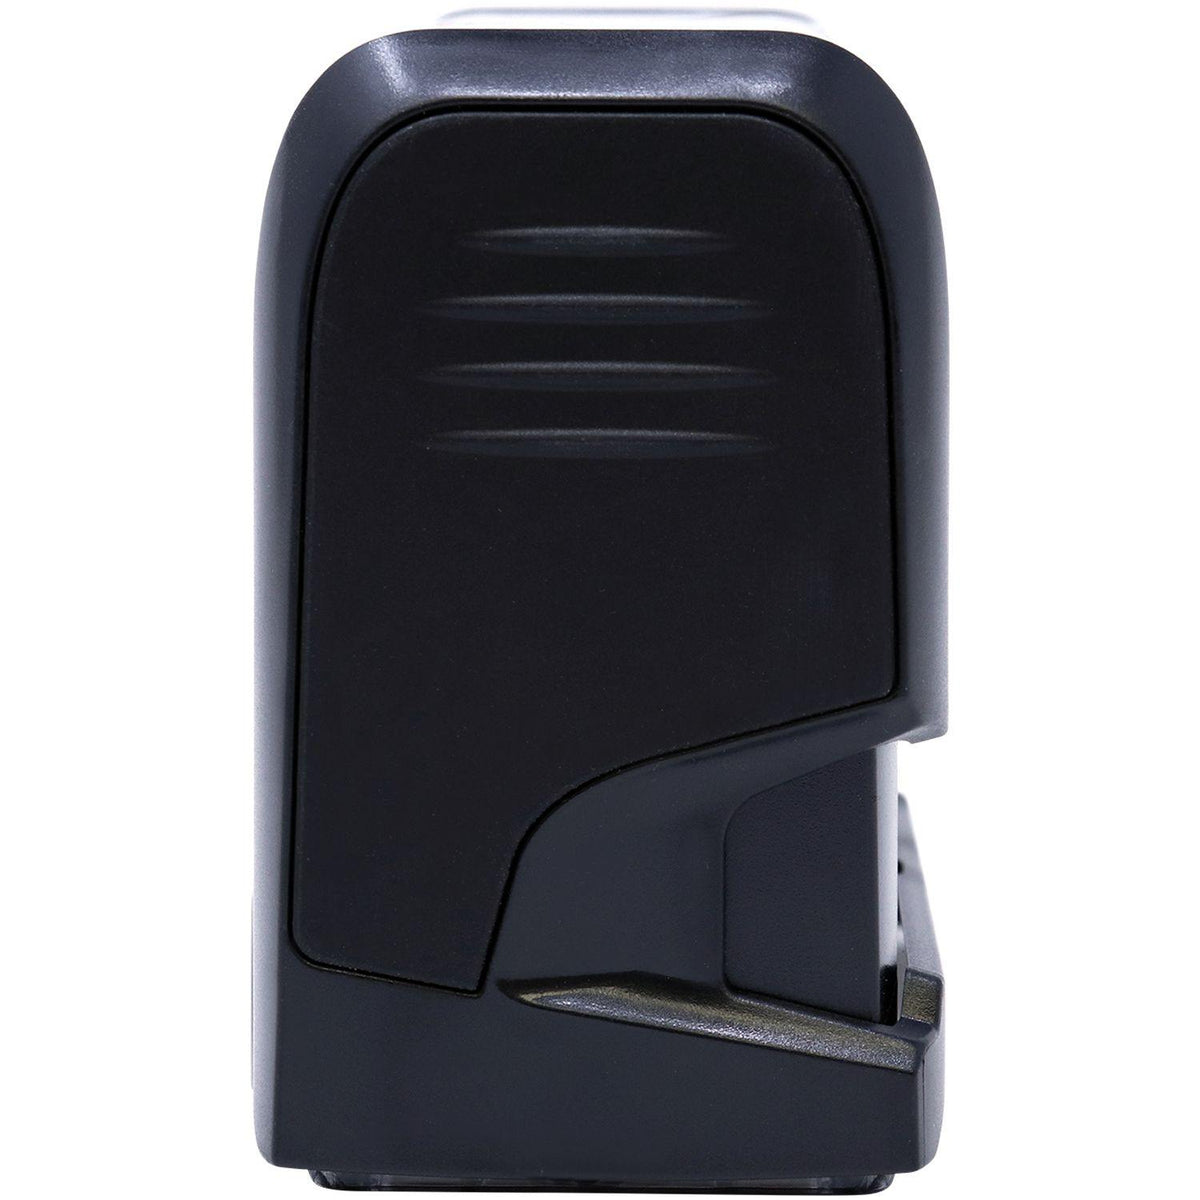 Self-Inking Contestado Stamp - Engineer Seal Stamps - Brand_Trodat, Impression Size_Small, Stamp Type_Self-Inking Stamp, Type of Use_Business, Type of Use_General, Type of Use_Office